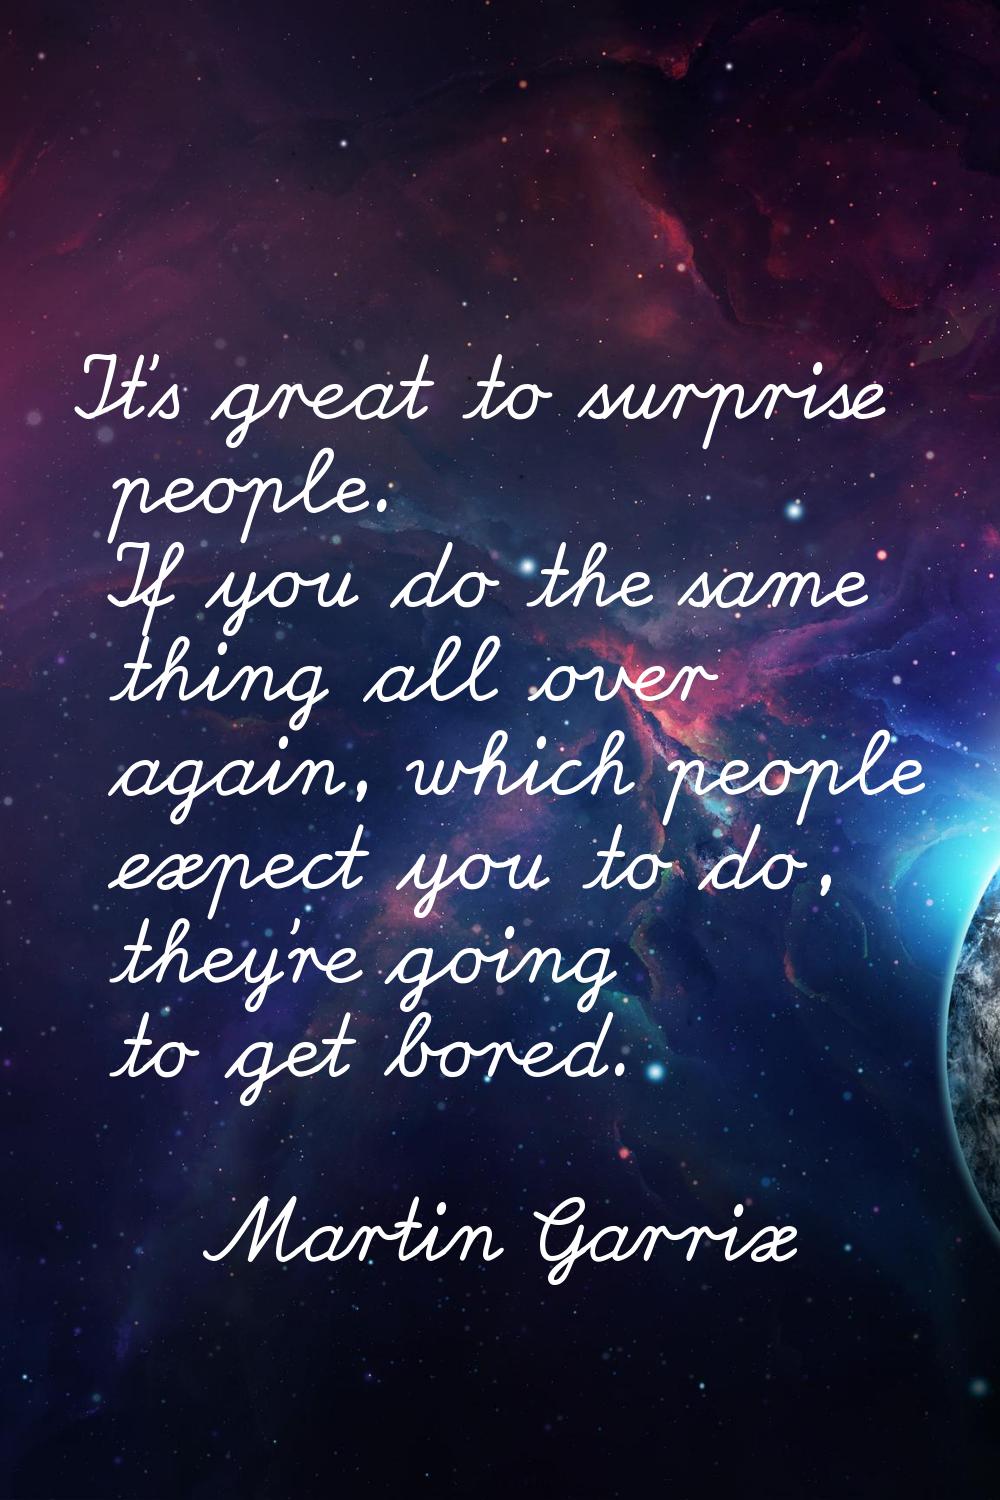 It's great to surprise people. If you do the same thing all over again, which people expect you to 